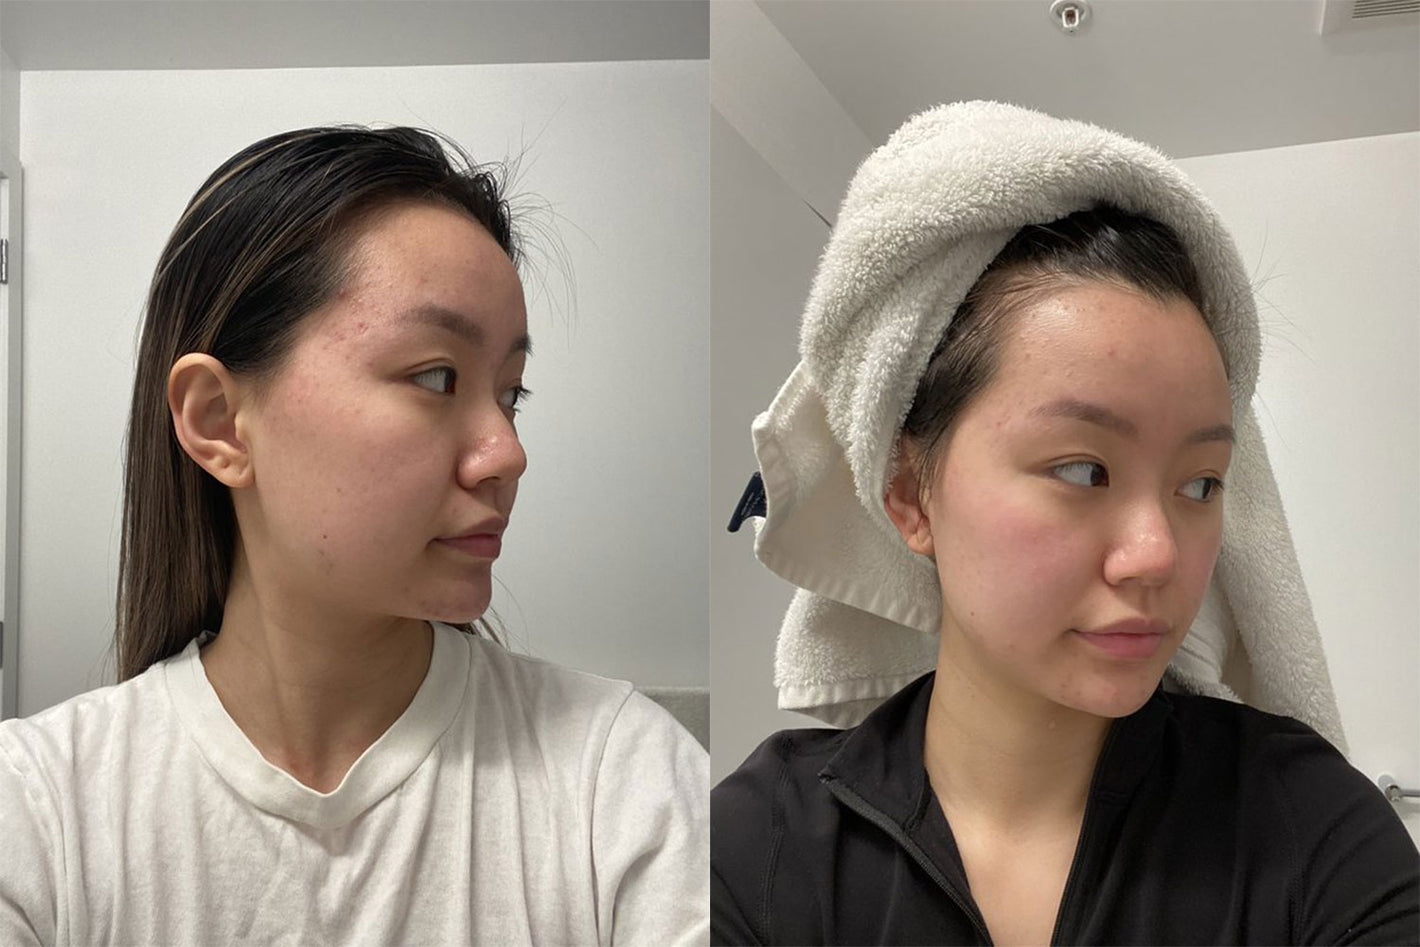 before & after using the Personal Microderm